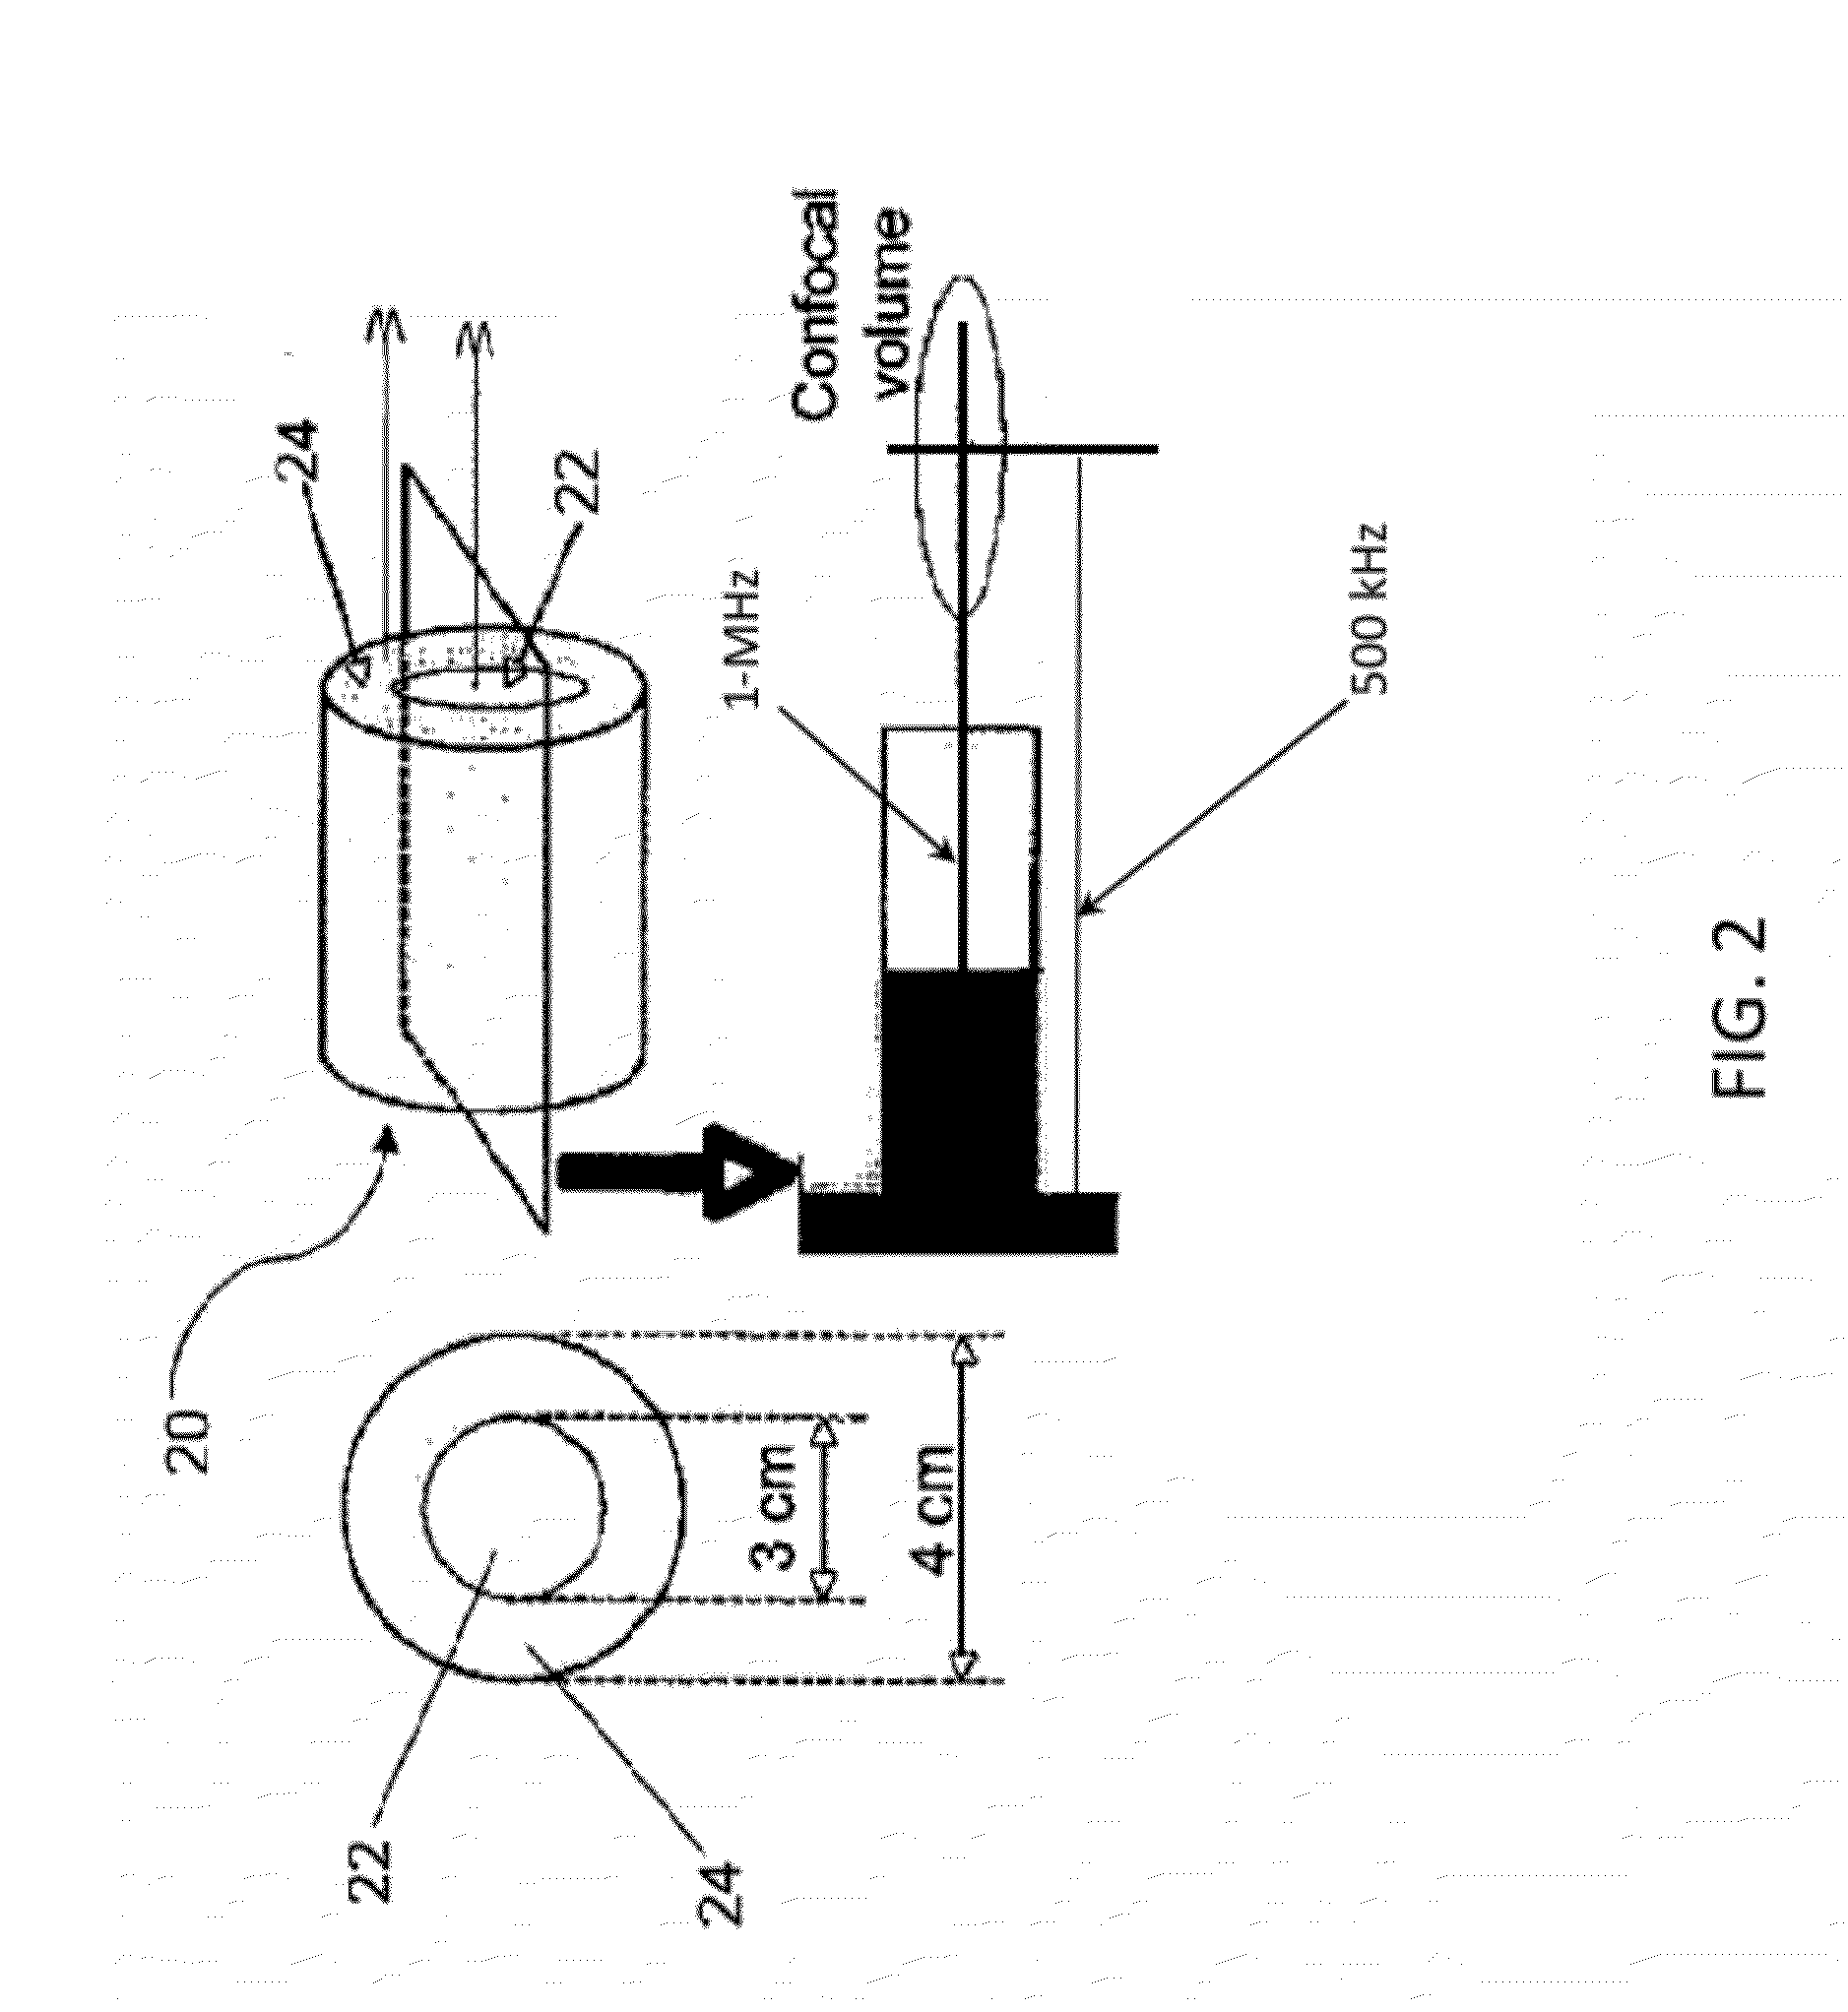 Methods of Enhancing Delivery of Drugs Using Ultrasonic Waves and Systems for Performing The Same